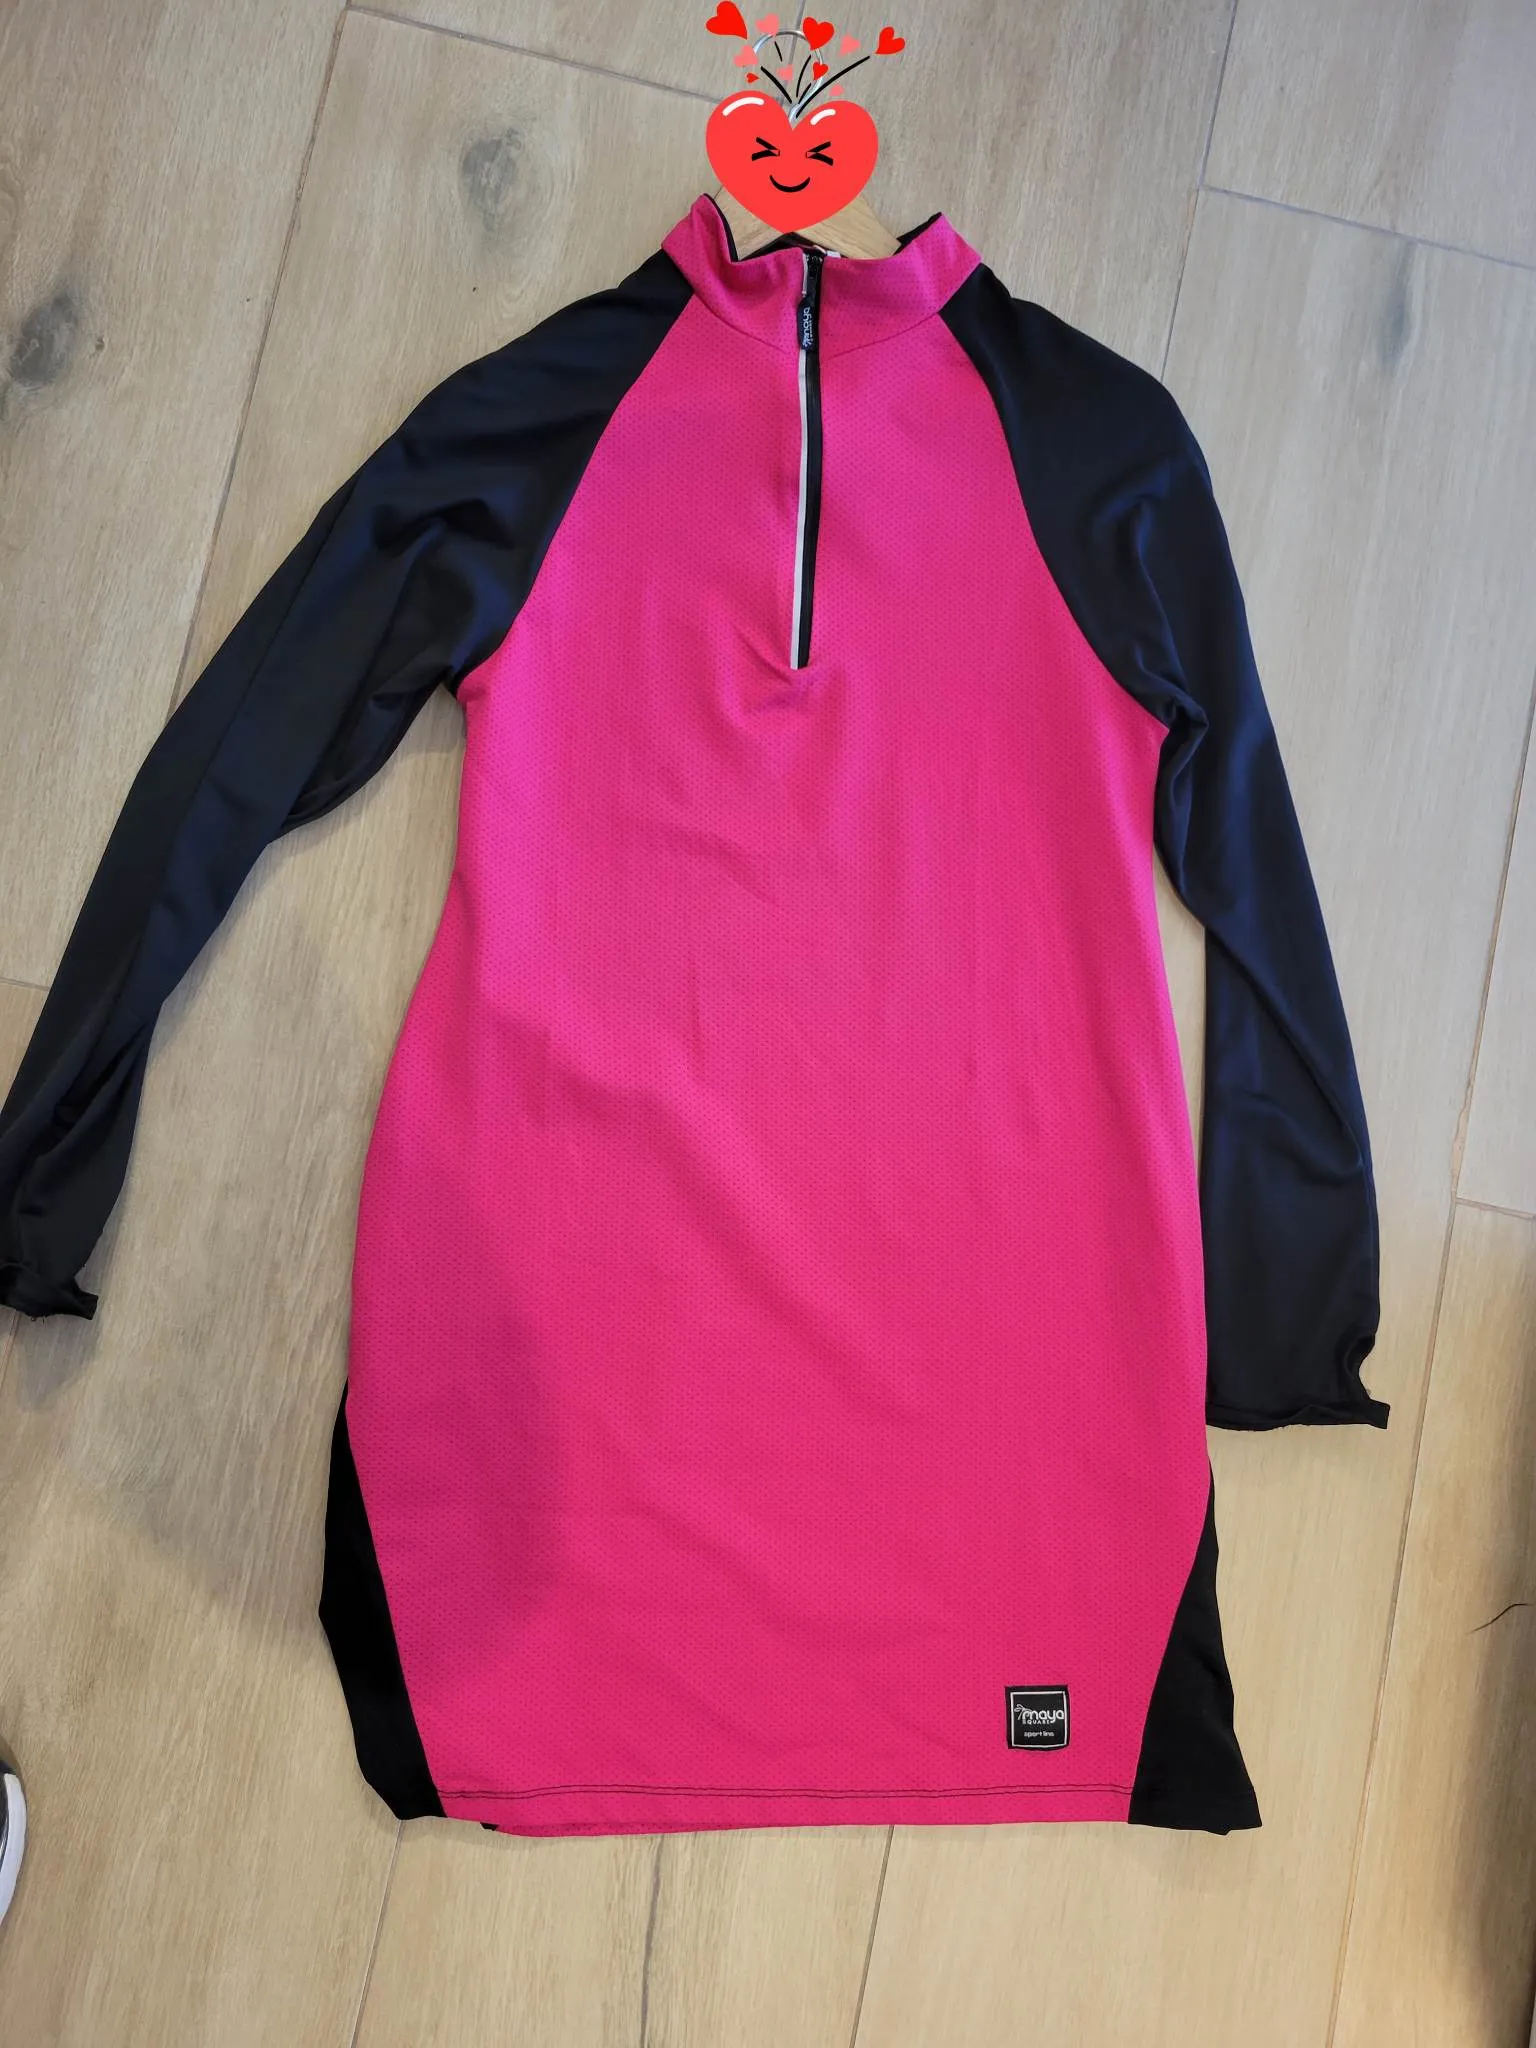 Sports Sweater Pink Intensity photo review